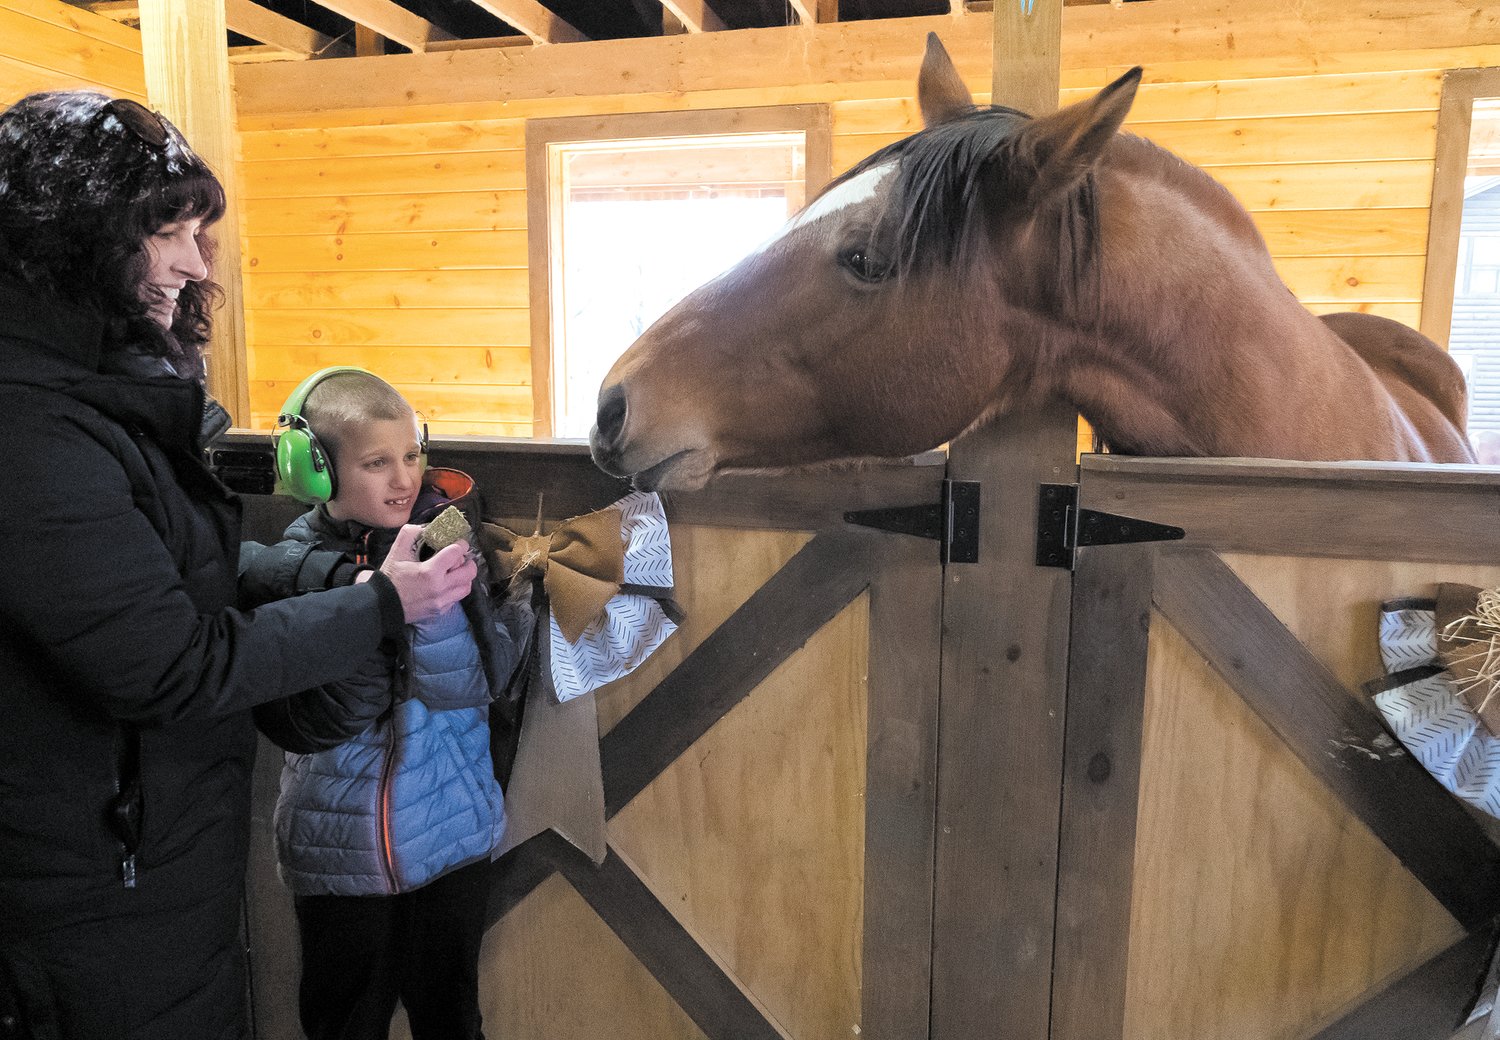 FEED CUBE TIME: Stephanie Ourique Pinto and Domenic Pinto try their hands at feeding Jackie, one of Equi Evolution's horses, a feed cube during Stone Hill Elementary School's field trip on Nov. 23. This was the first field trip for most, if not all, of the students.